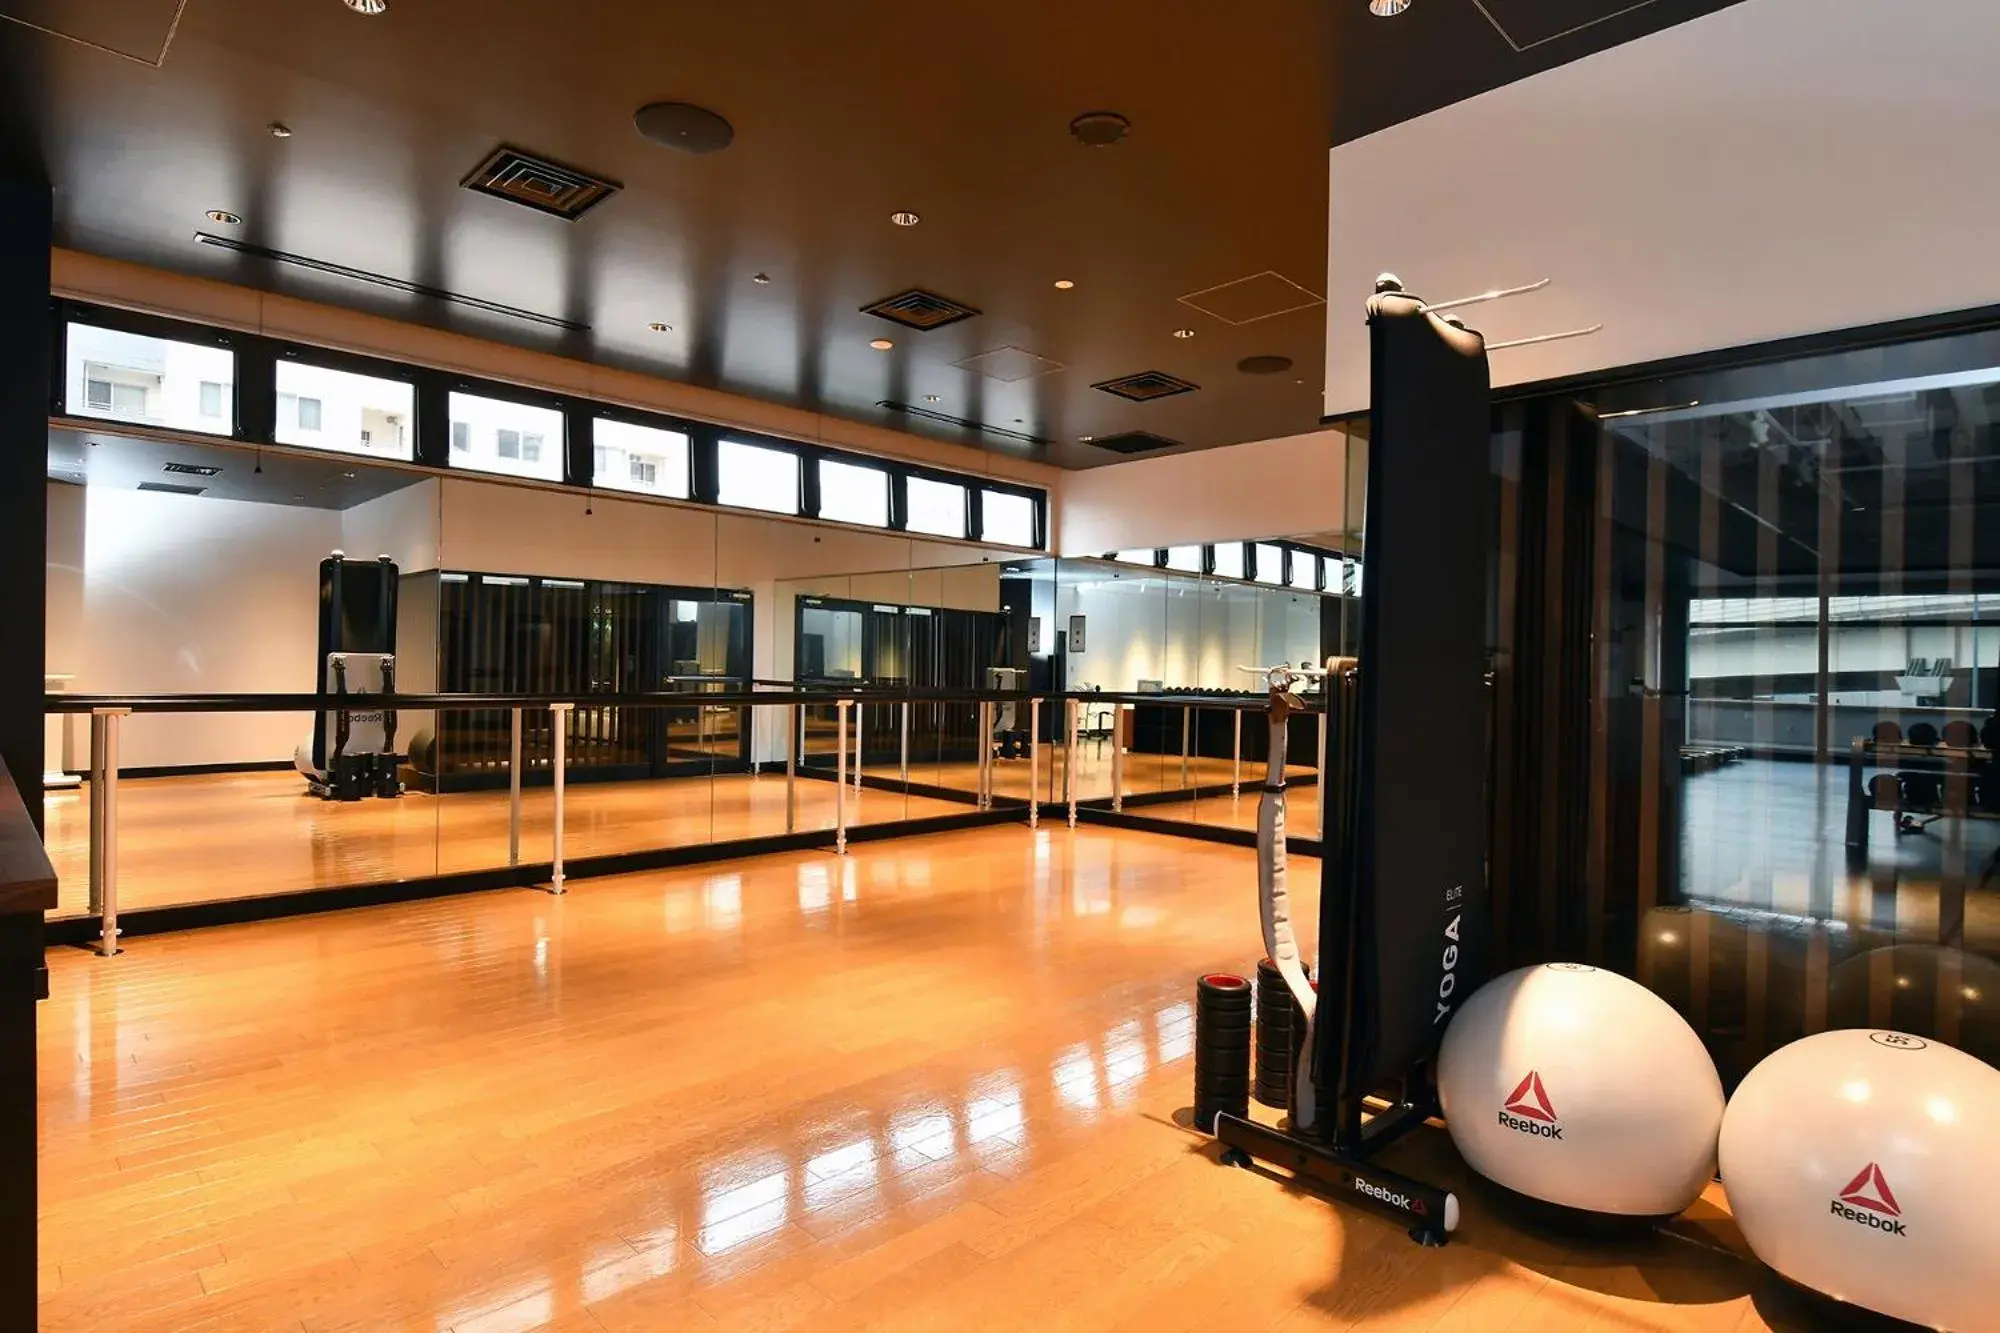 Fitness centre/facilities in Royal Park Hotel